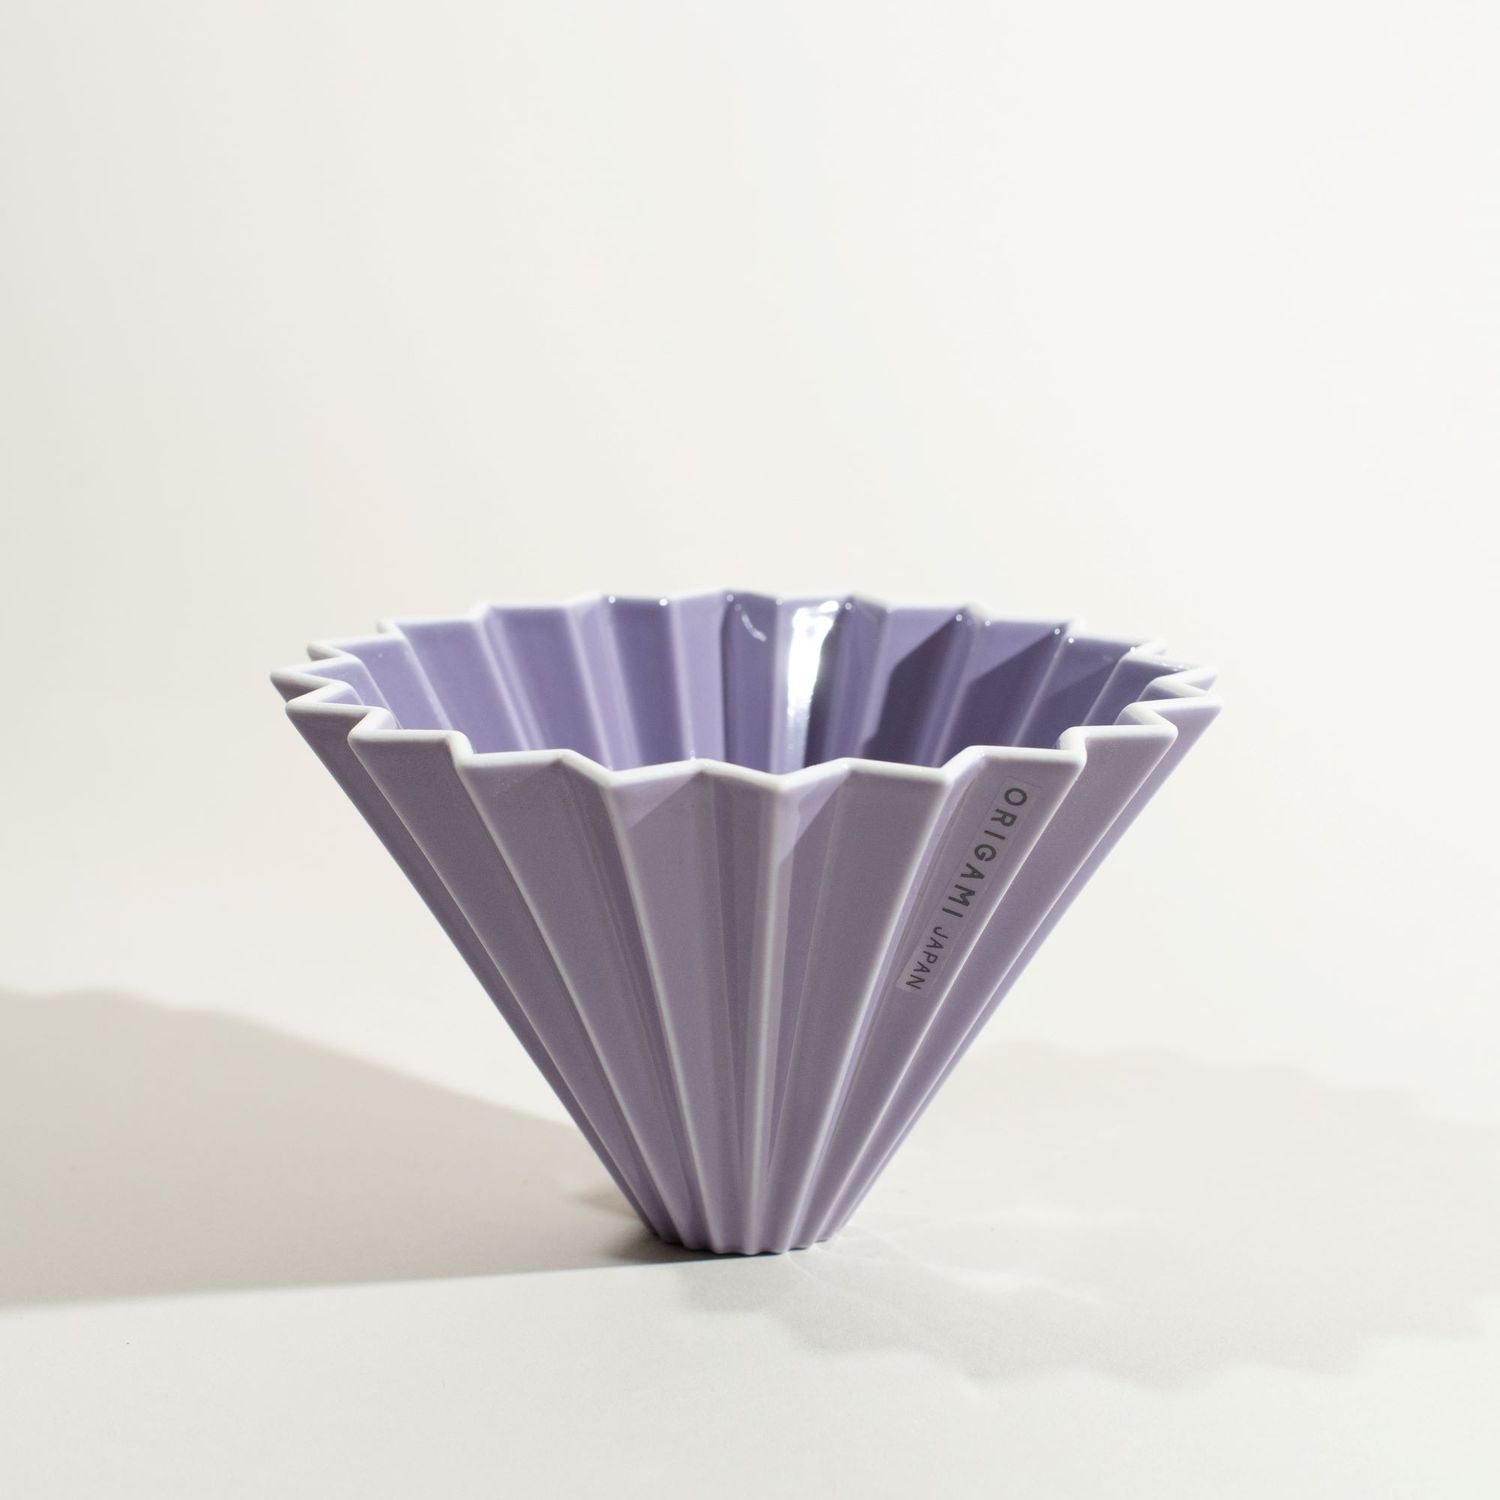 PURPLE ORIGAMI COFFEE DRIPPER, MADE IN JAPAN WITH MINO PORCELAIN, IT LOOKS LIKE A FOLDED ORIGAMI JUST LIKE ITS NAME SUGGESTS.